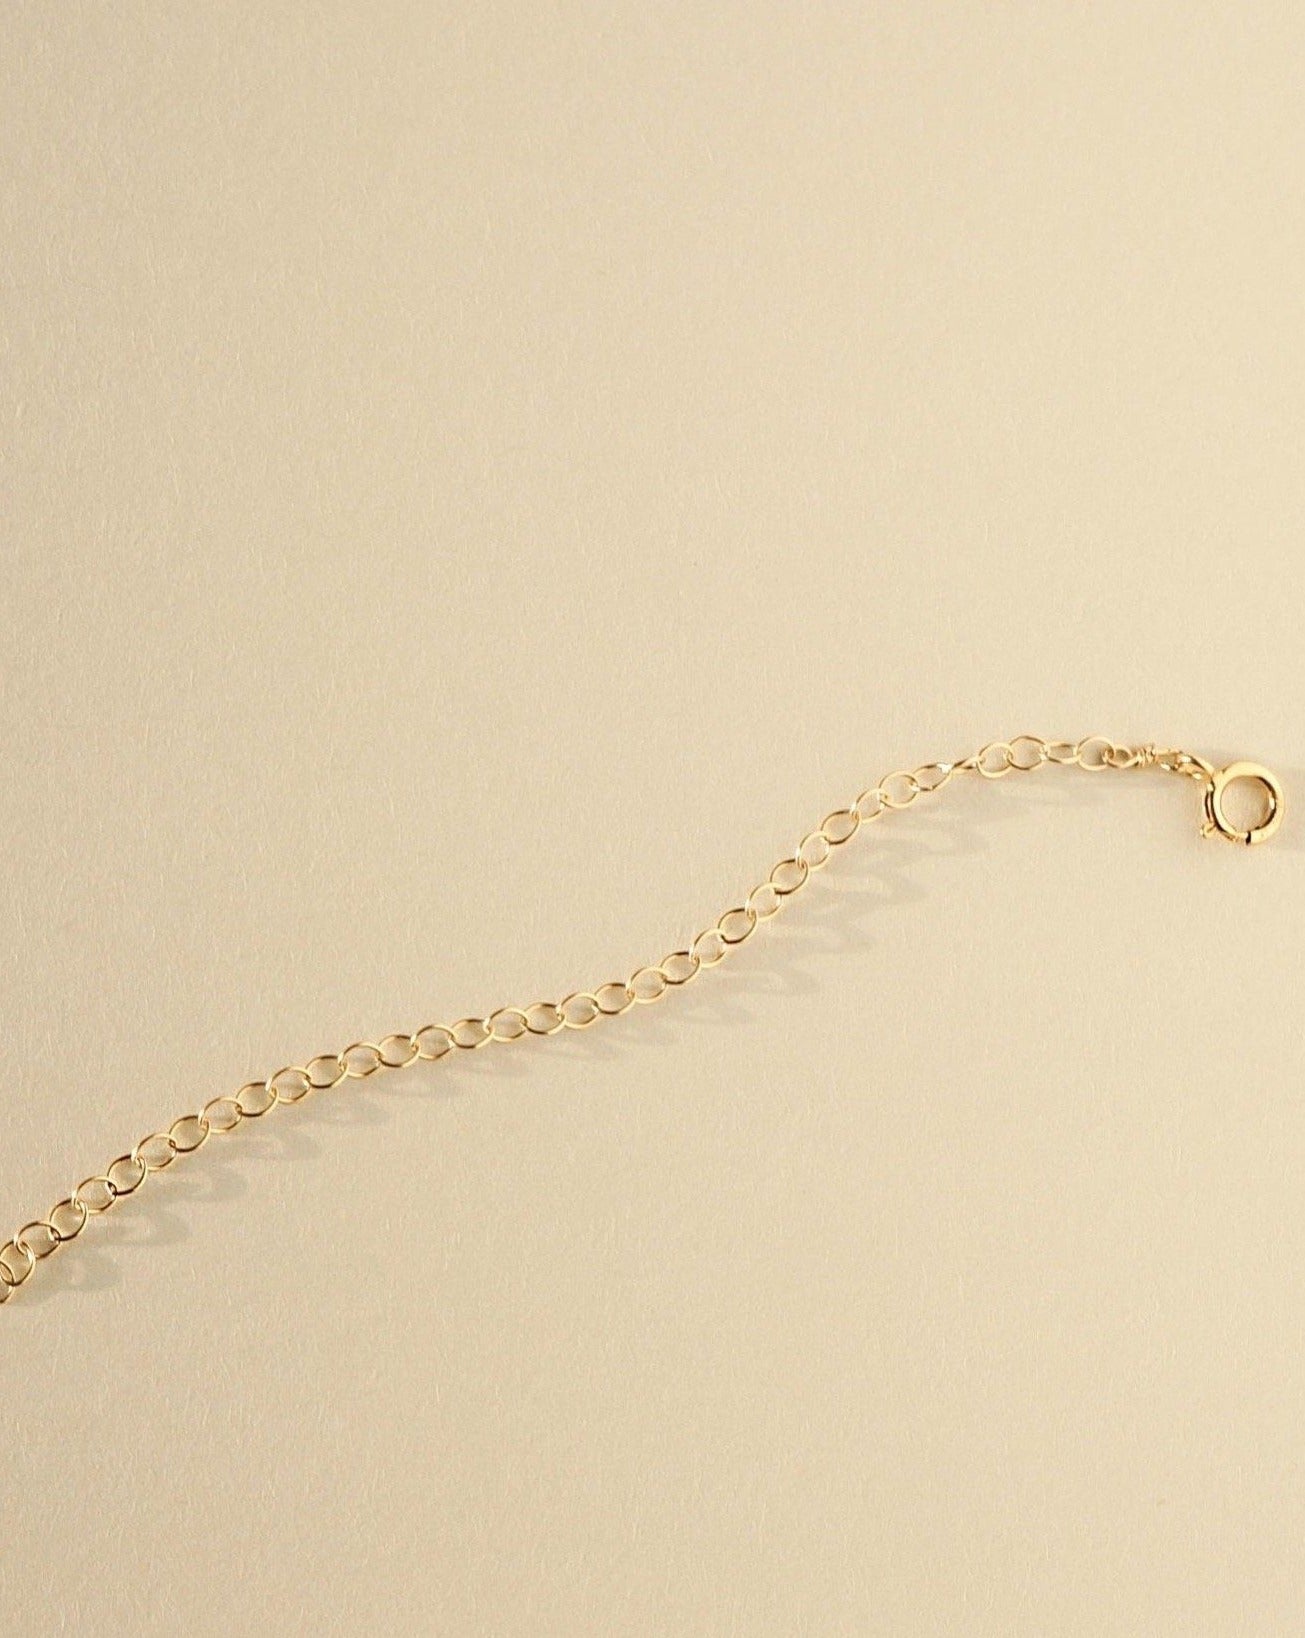 Extender Chain by KOZAKH. 3 inch long extender chain in 14K Gold Filled.